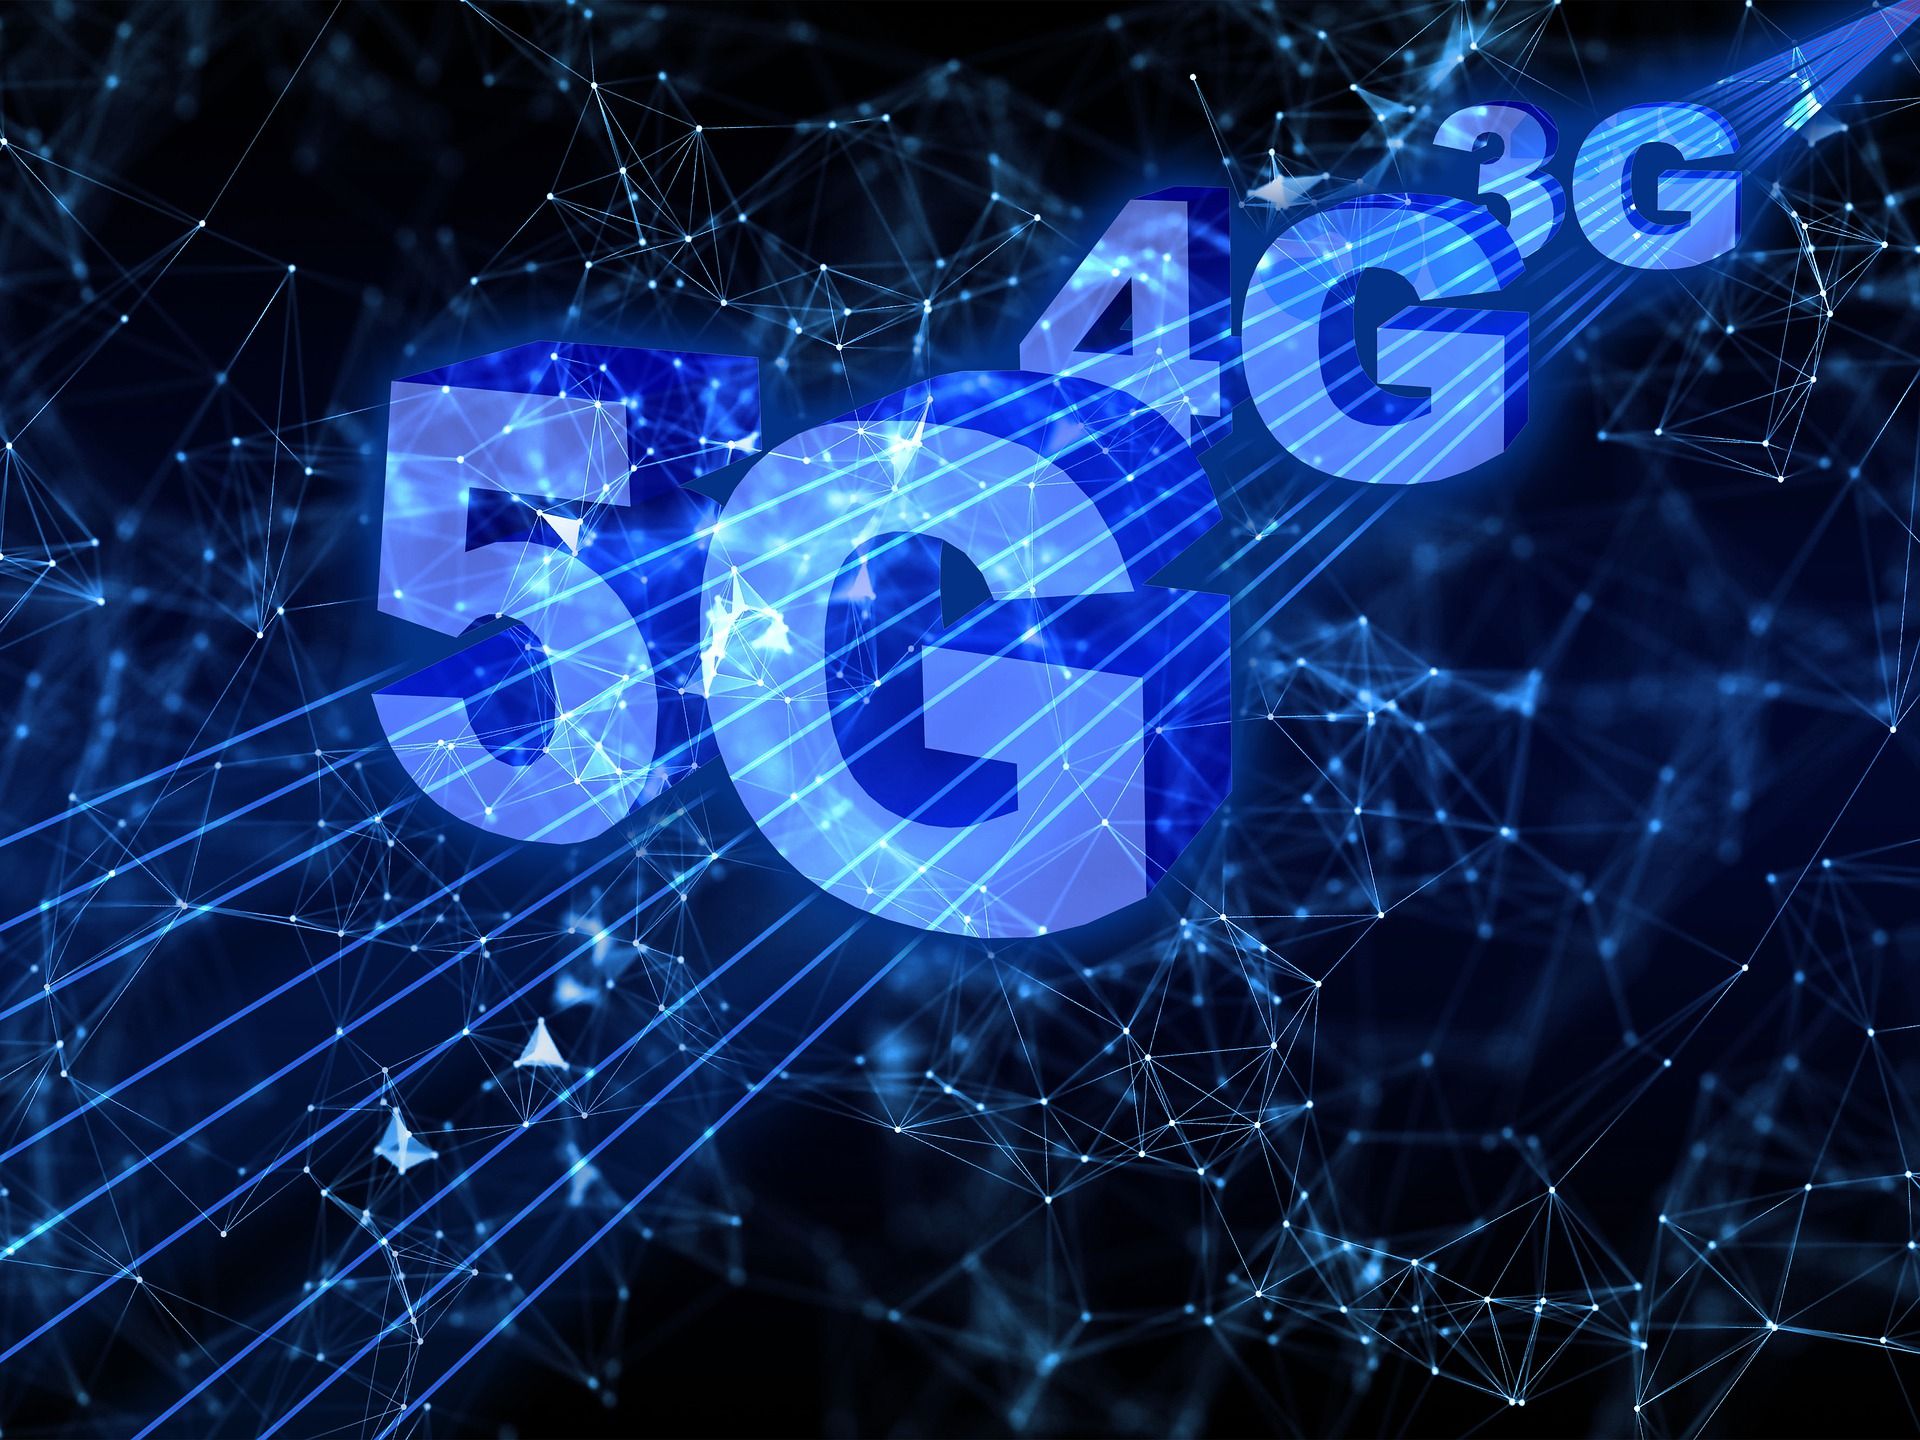 Black background showing 5G, 4G and 3G words appearing as a blue beam